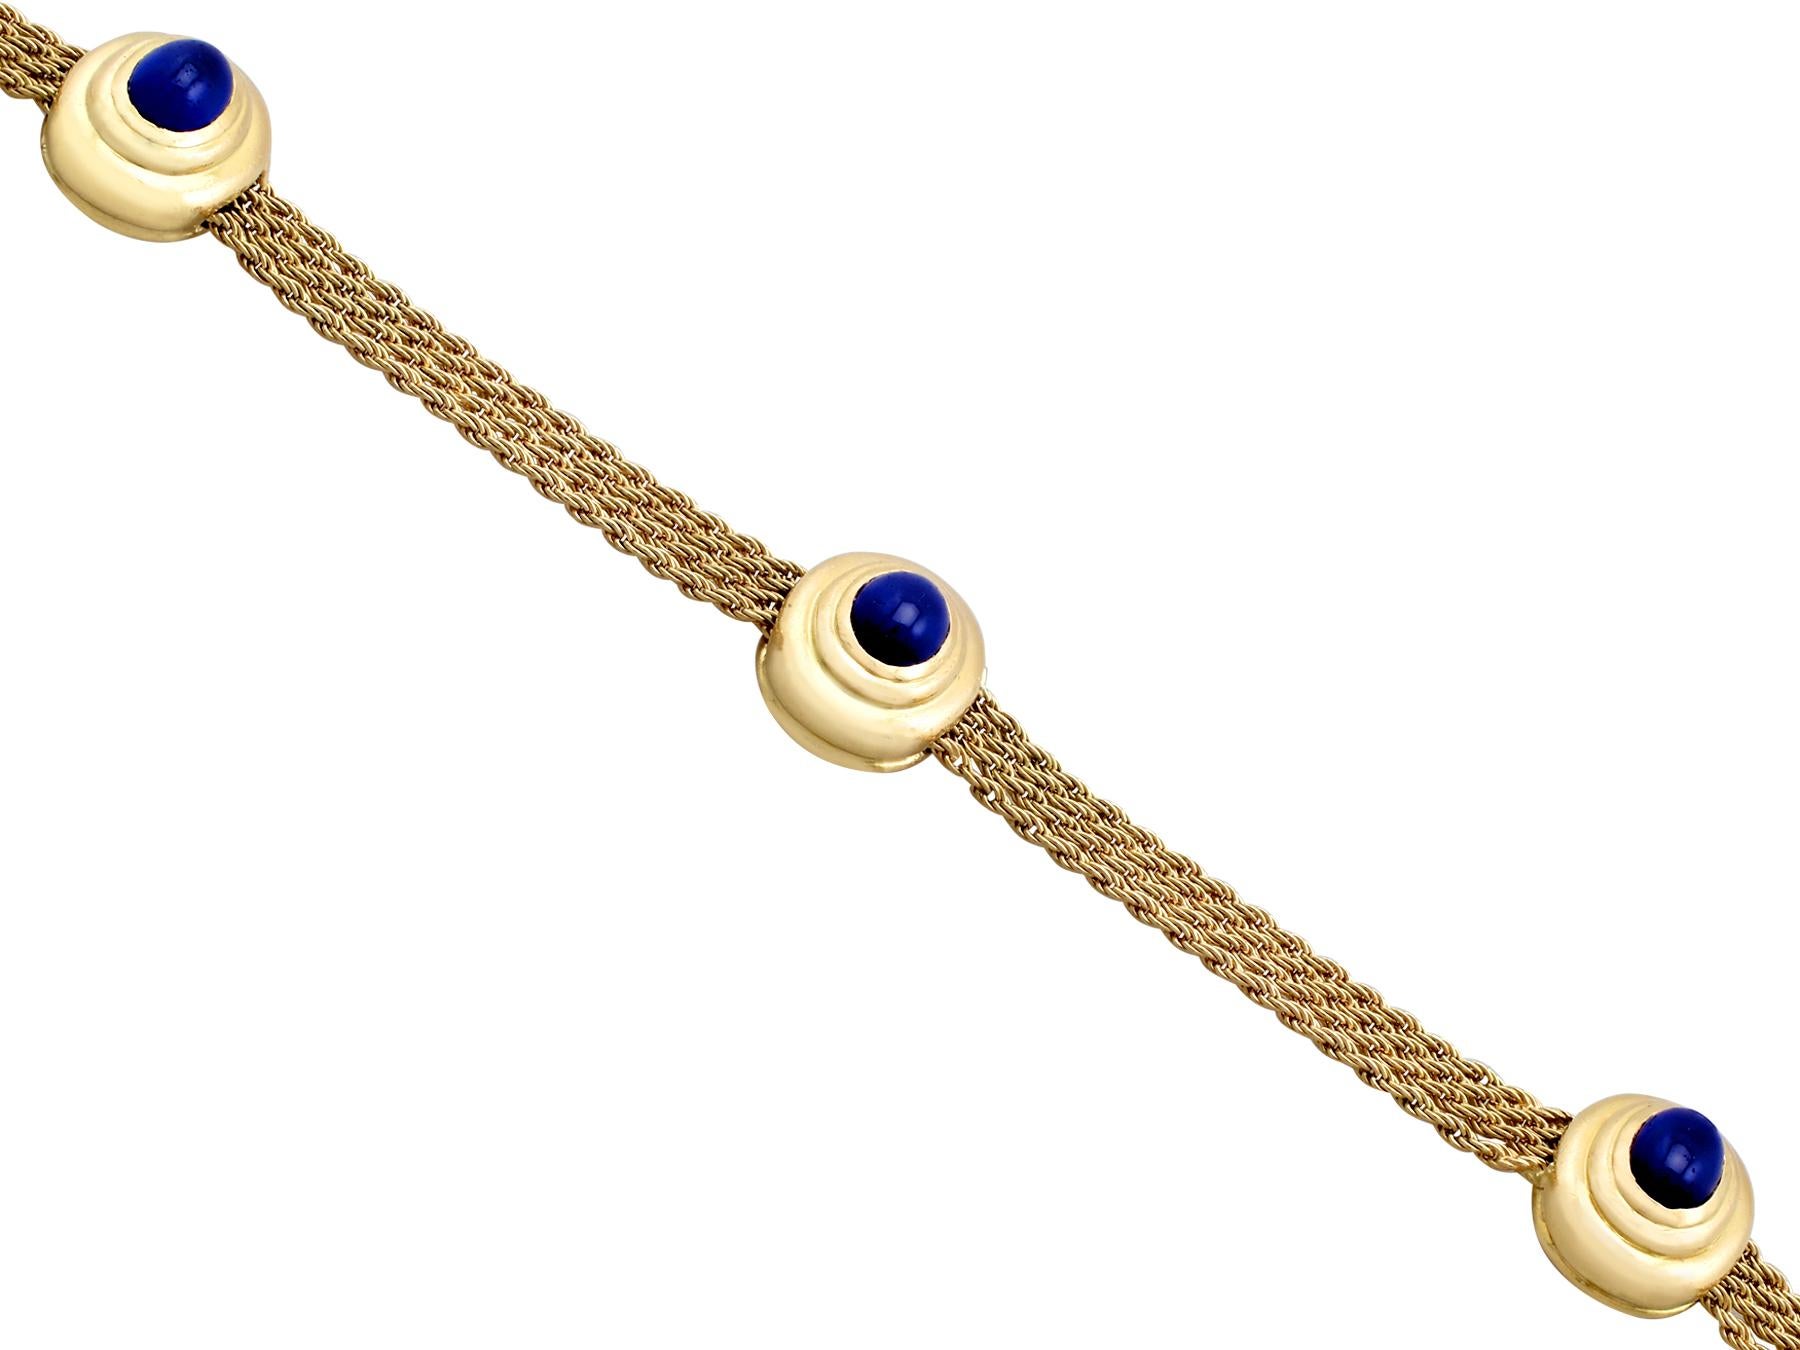 An impressive vintage 1960s 2.34 carat blue sapphire and 18 karat yellow gold bracelet; part of our diverse gemstone jewelry and estate jewelry collections.

This fine and impressive vintage sapphire bracelet has been crafted in 18k yellow